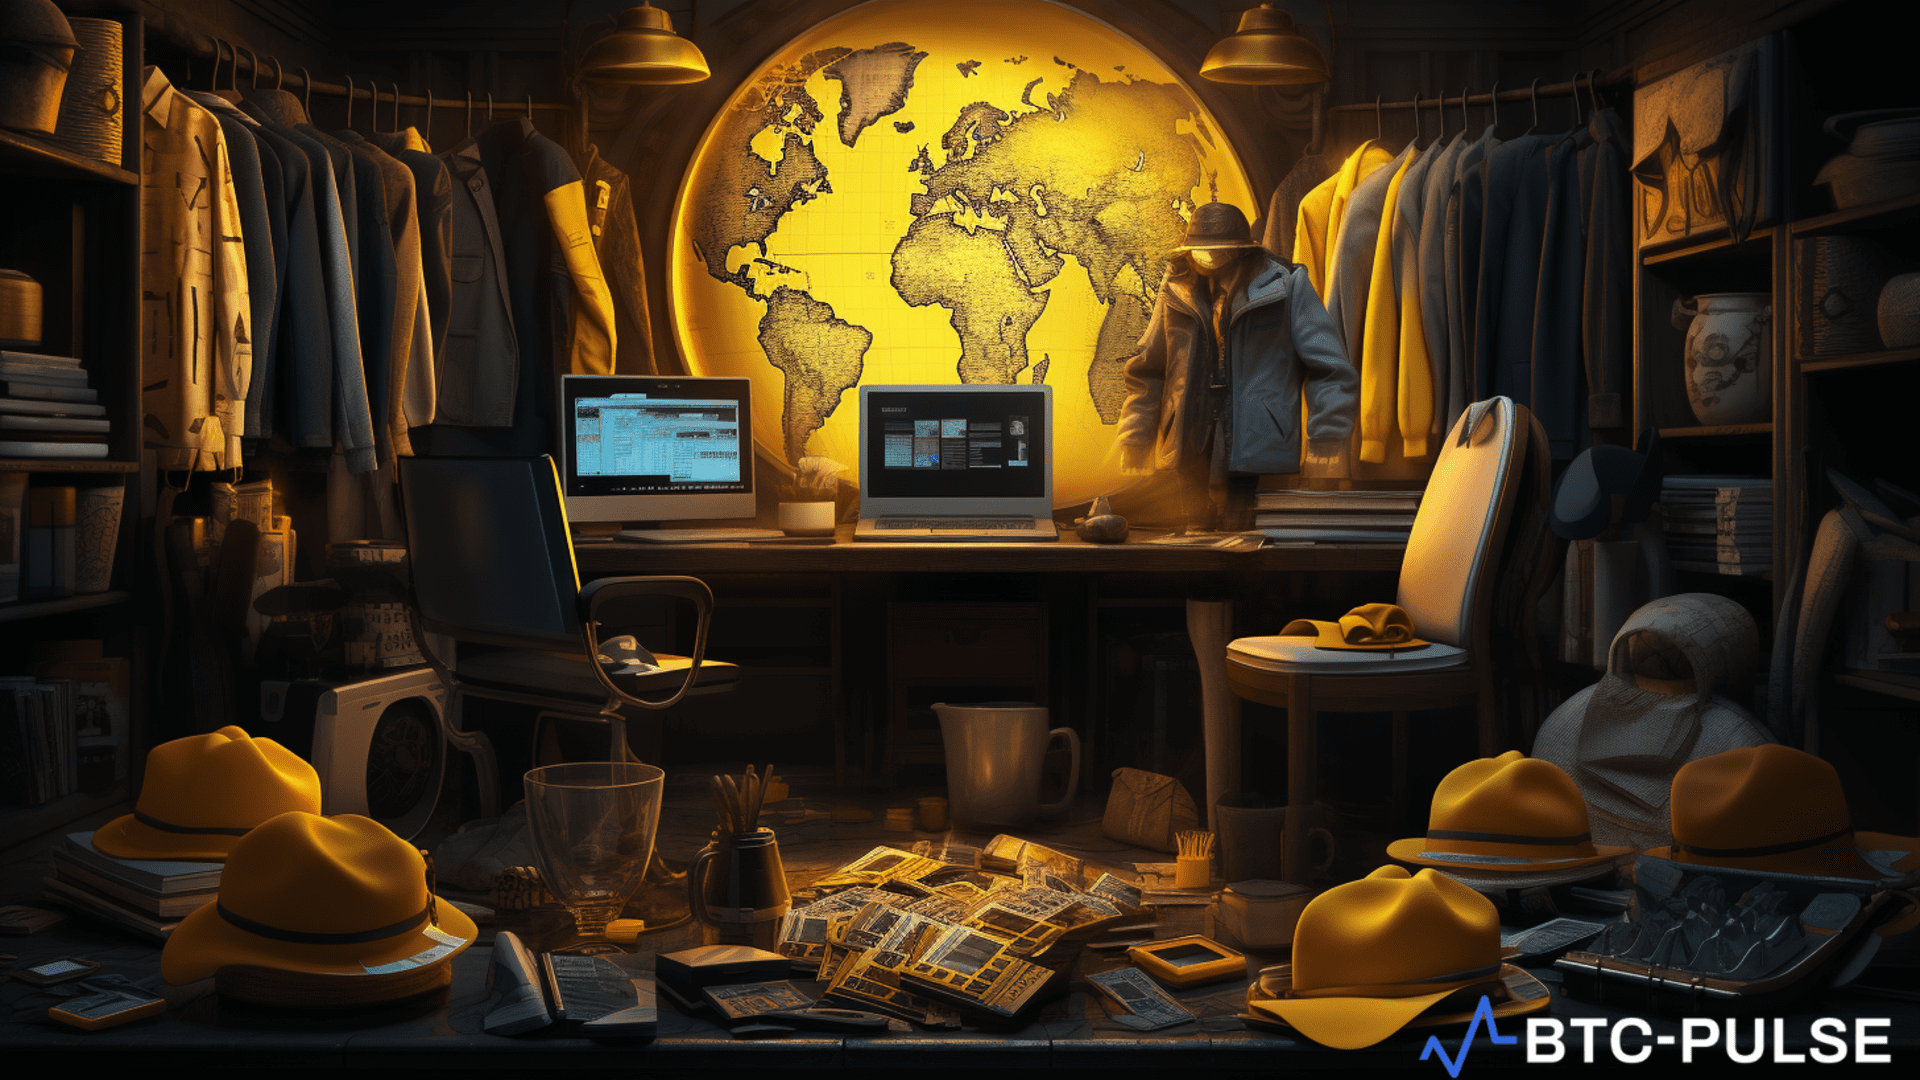 Binance partners with Global Travel Rule Alliance to strengthen anti-money laundering efforts and enhance user security.